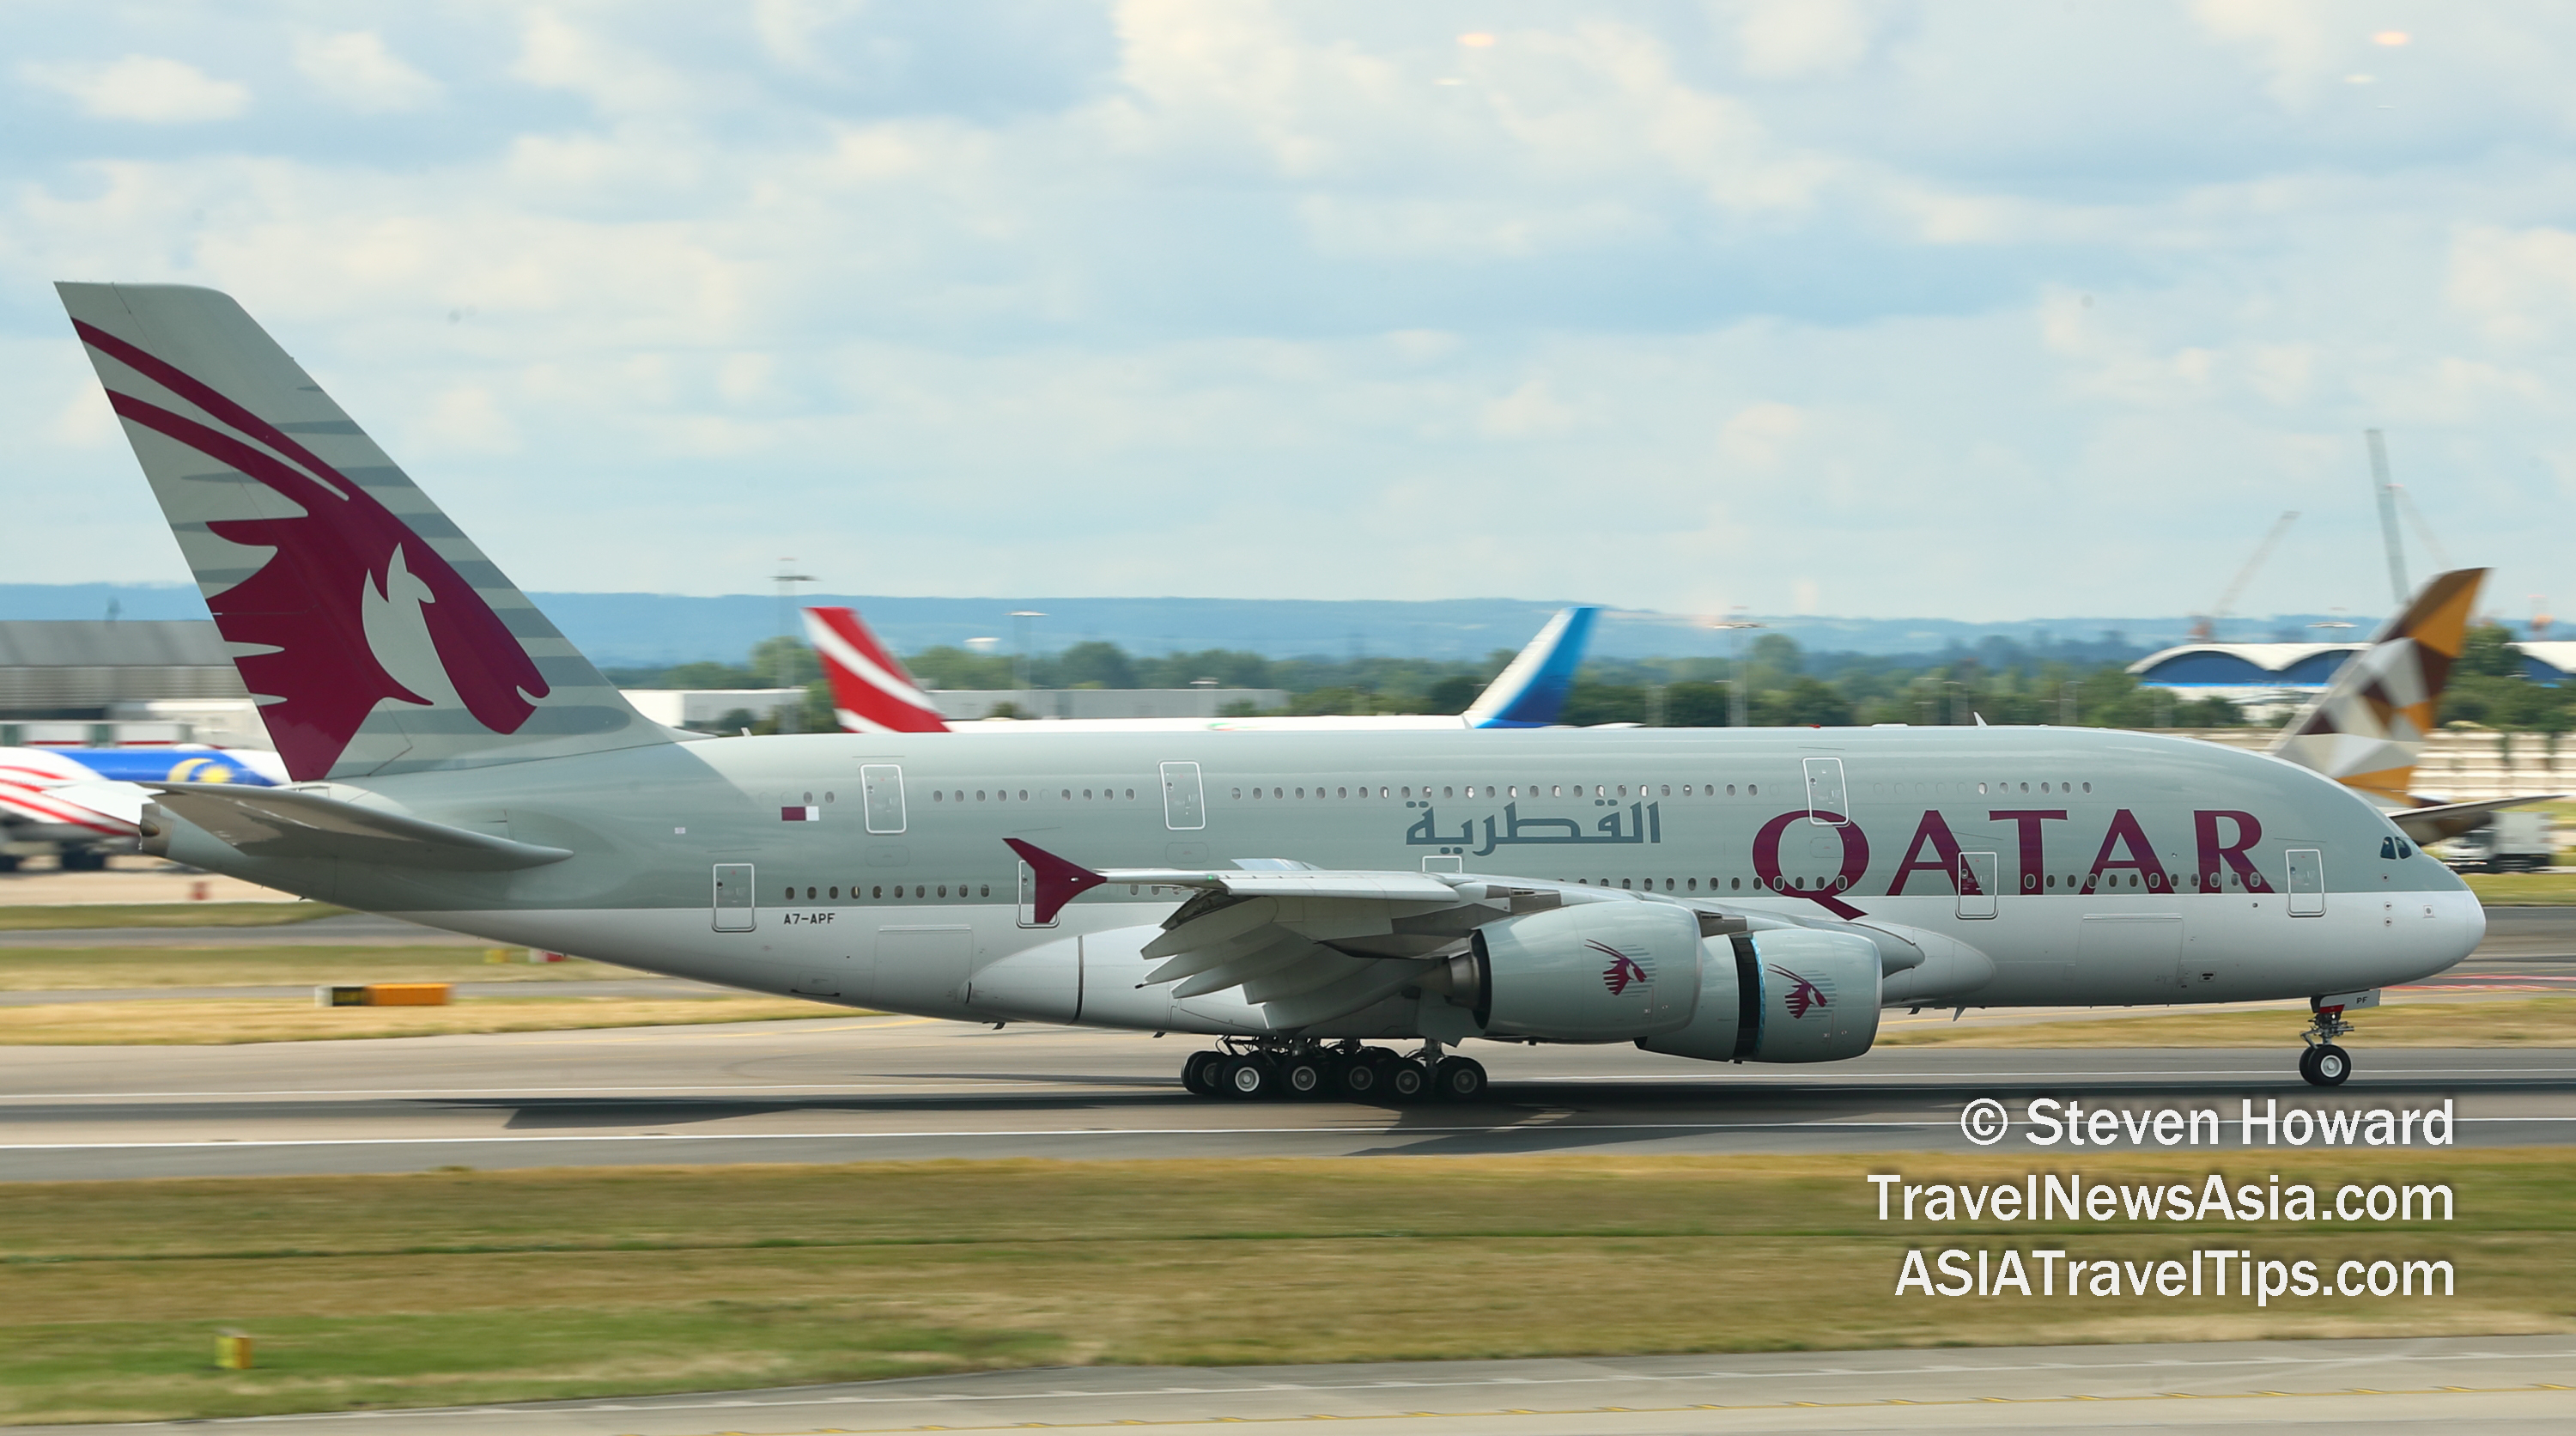 Qatar Airways Airbus A380 reg: A7-APF. Picture by Steven Howard of TravelNewsAsia.com Click to enlarge.